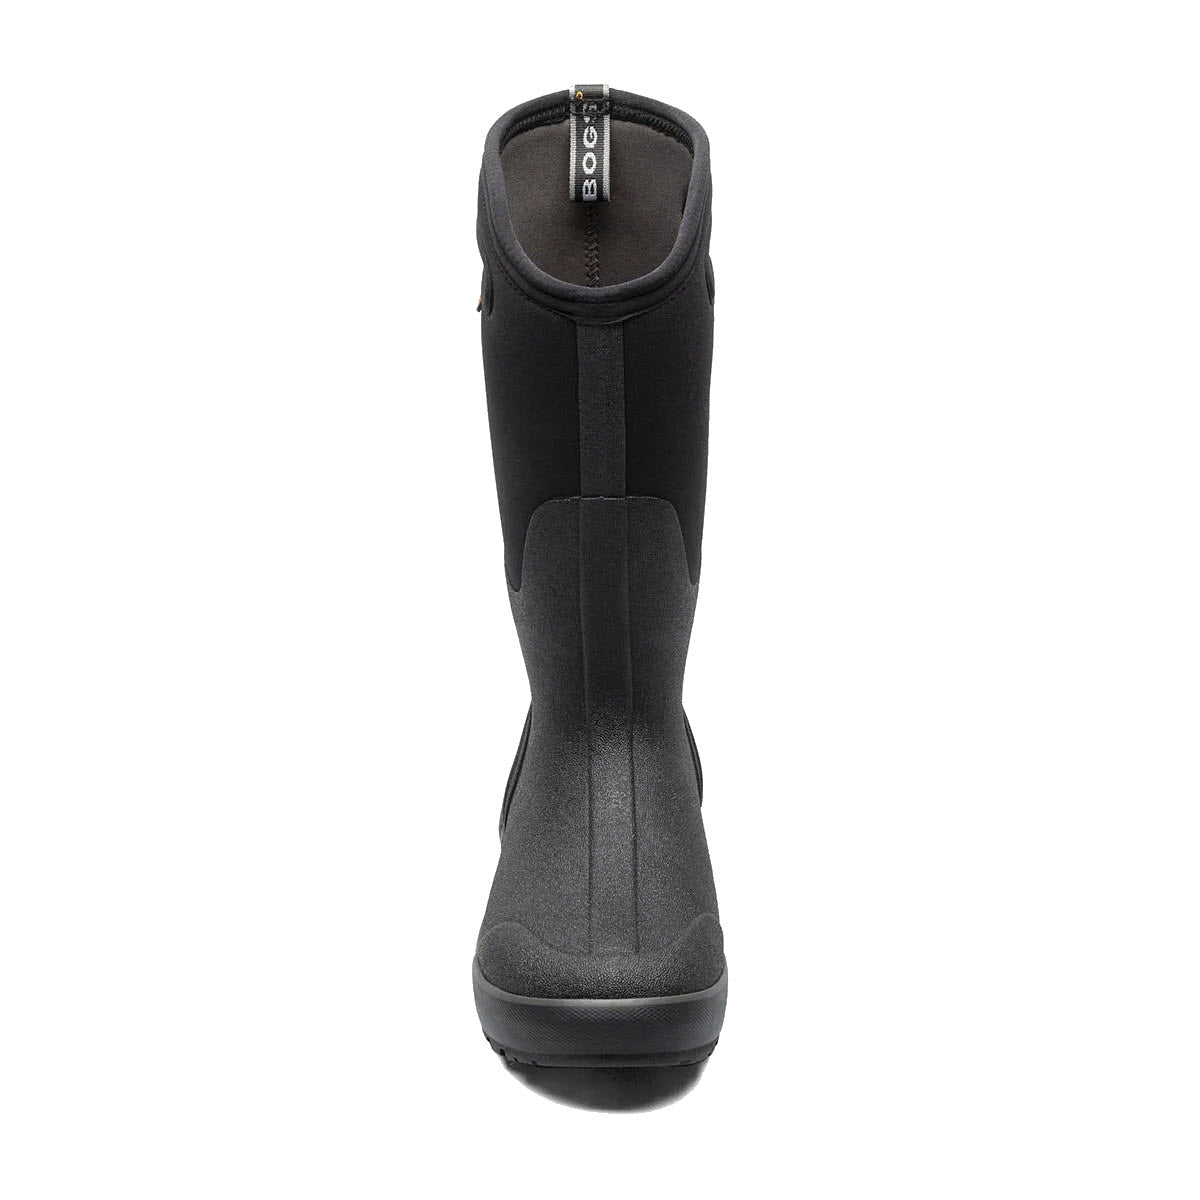 A front view of a Bogs Classic Tall II Black - Womens winter boot with a zipper and round toe, isolated on a white background.